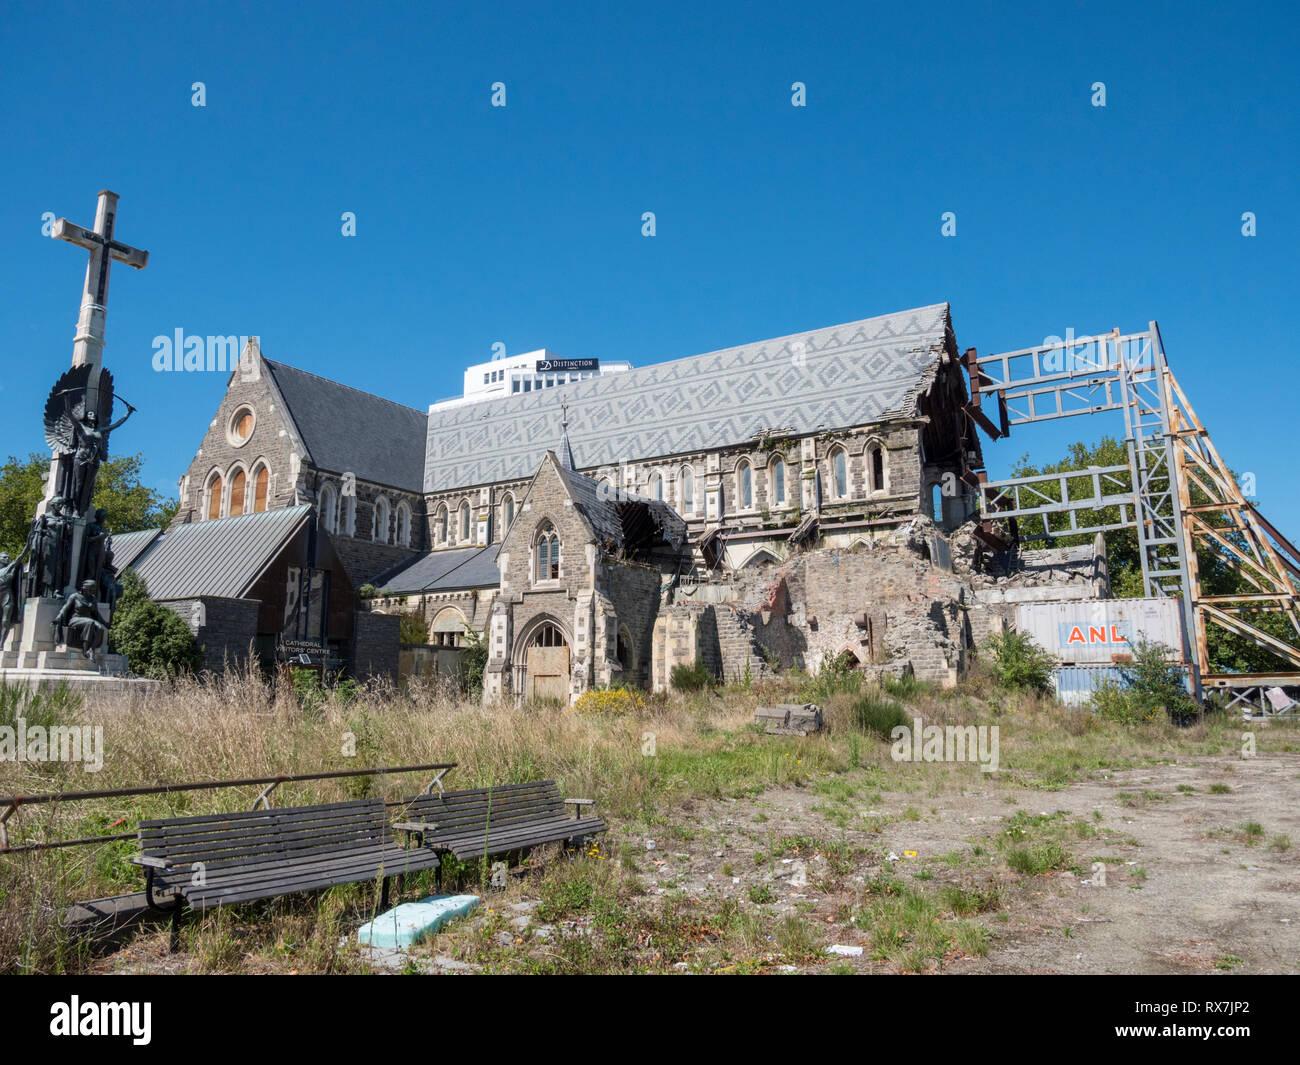 The earhquake damaged old Christchurch Cathedral New Zealand showing the metal protective scaffolding keeping it safe from further damage Stock Photo